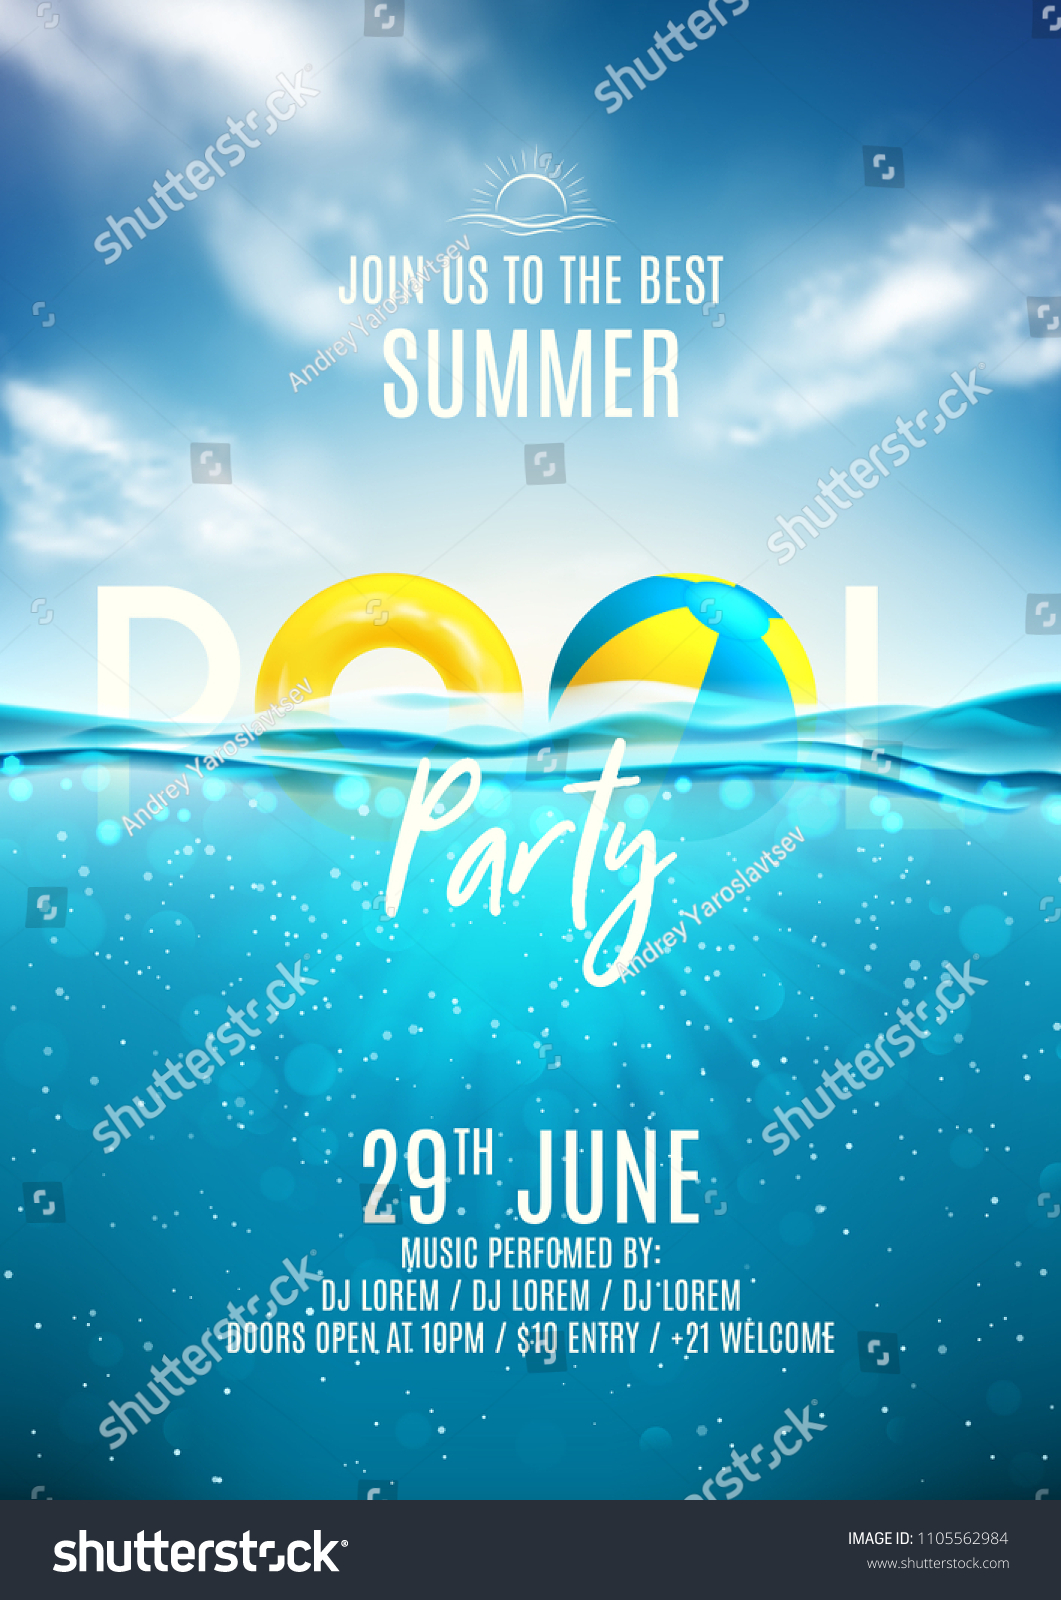 Summer pool party poster template. Vector illustration with deep underwater ocean scene. Background with realistic clouds and marine horizon. Invitation to nightclub. #1105562984